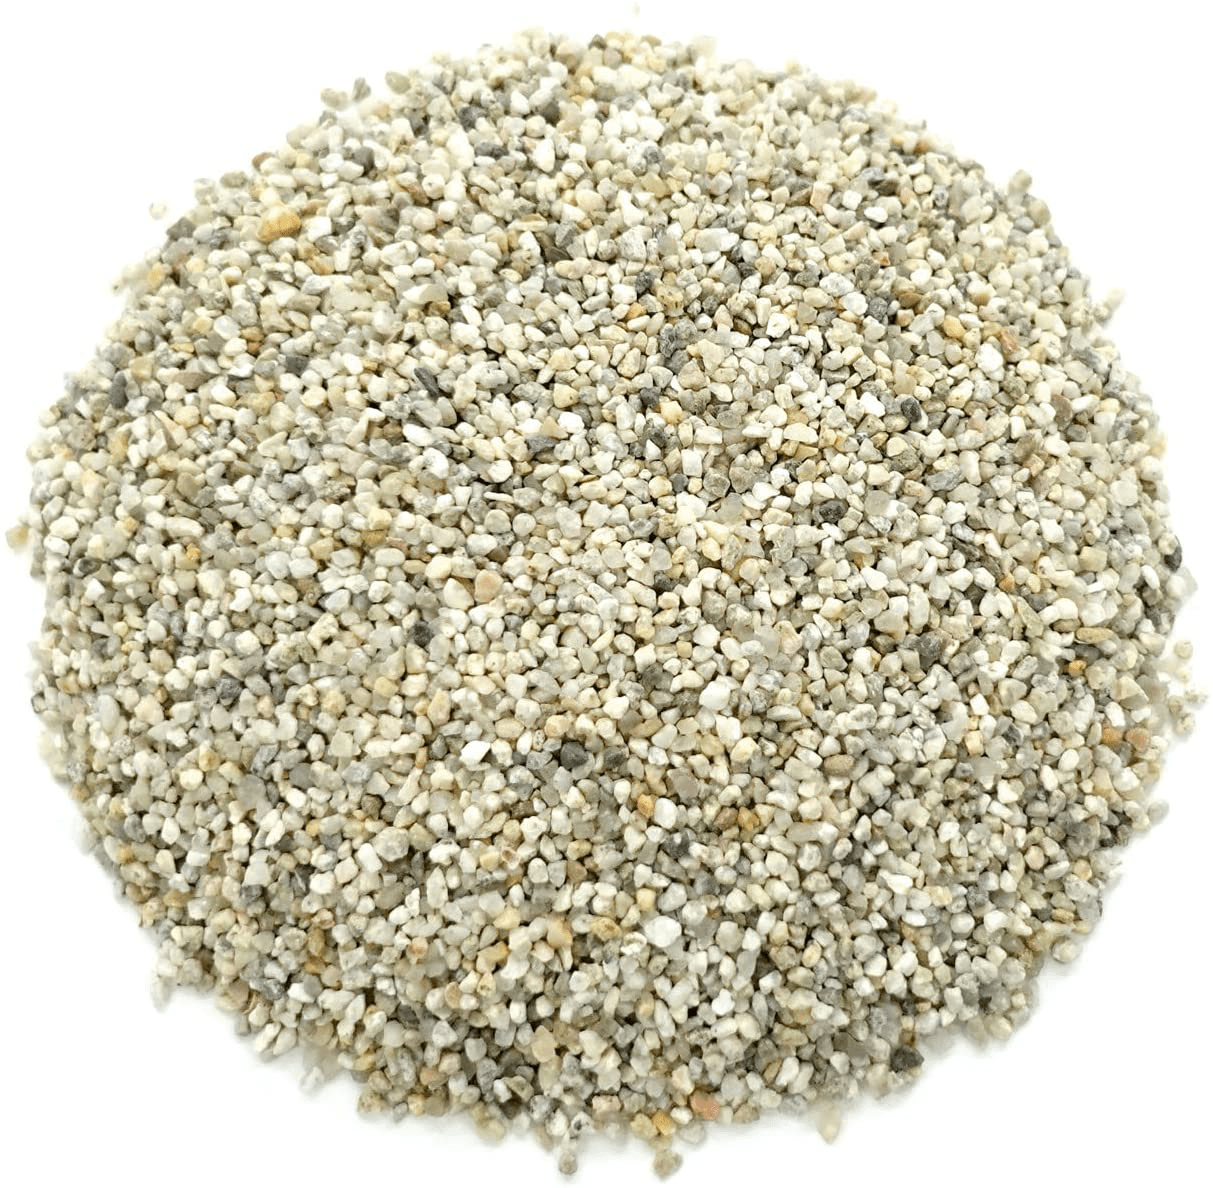 2 Pounds Natural Coarse Silica Sand - for Use in Crafts, Decor, Gardening, Vase Filler, Aquariums, Terrariums and More